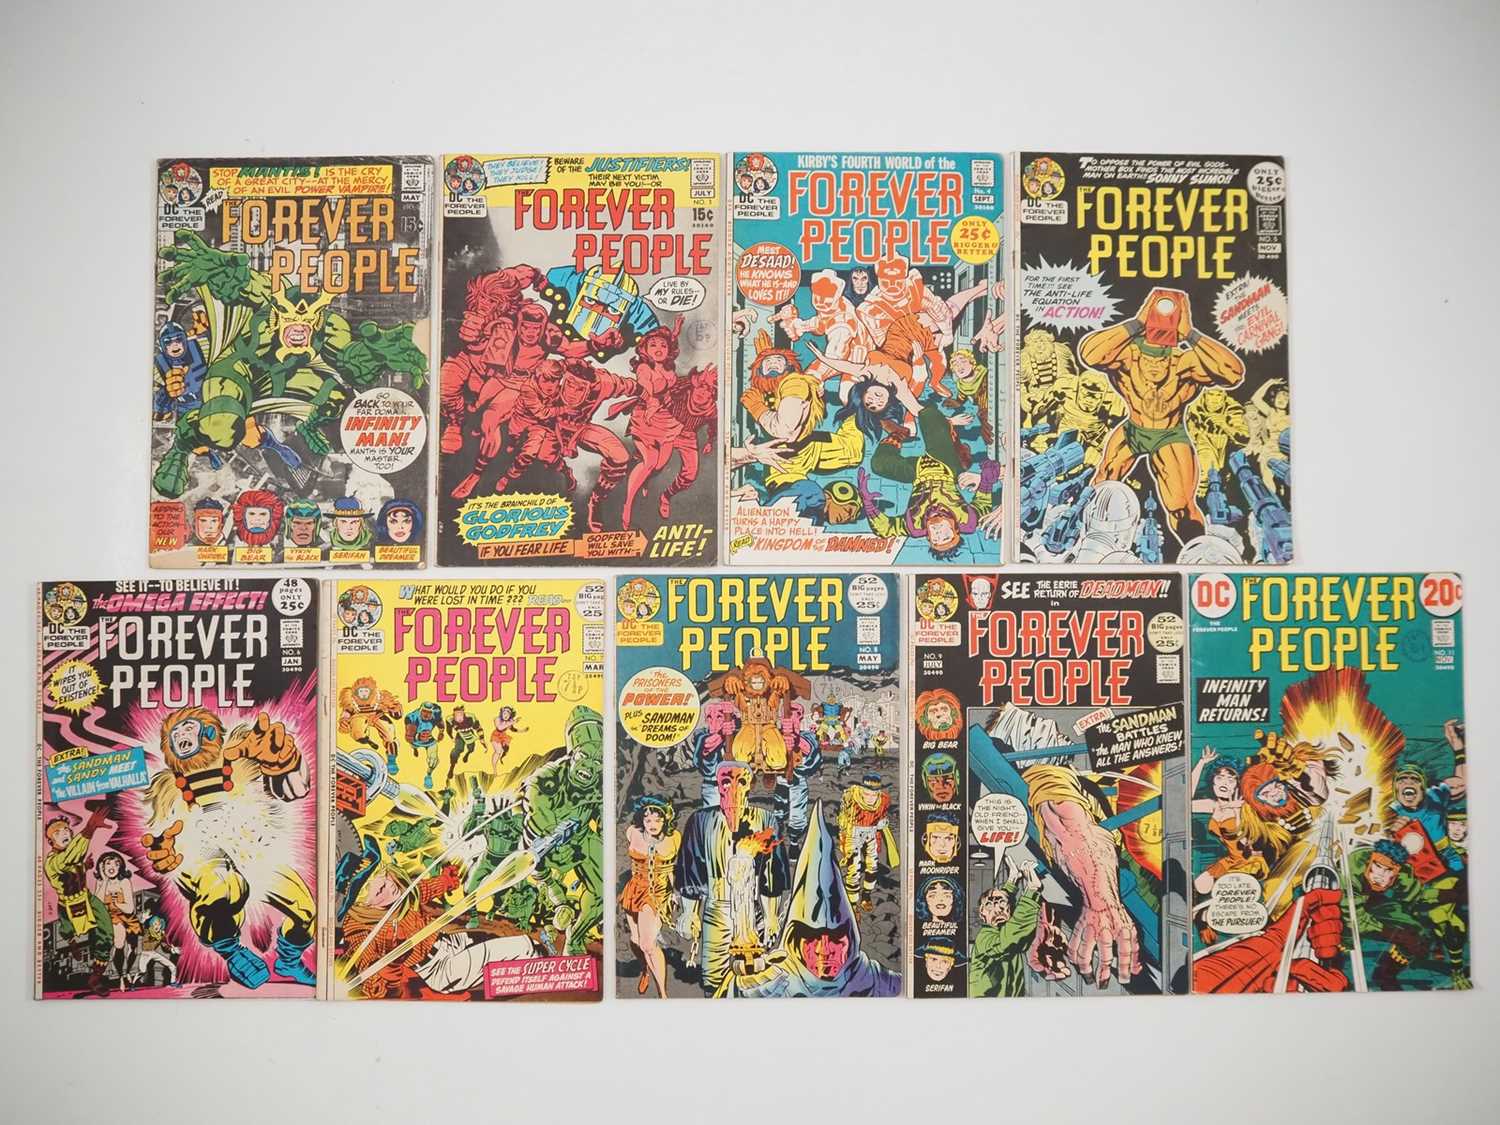 FOREVER PEOPLE 2, 3, 4, 5, 6, 7, 8, 9, 11 (9 in Lot) - (1971/1972 - DC) - Includes the first